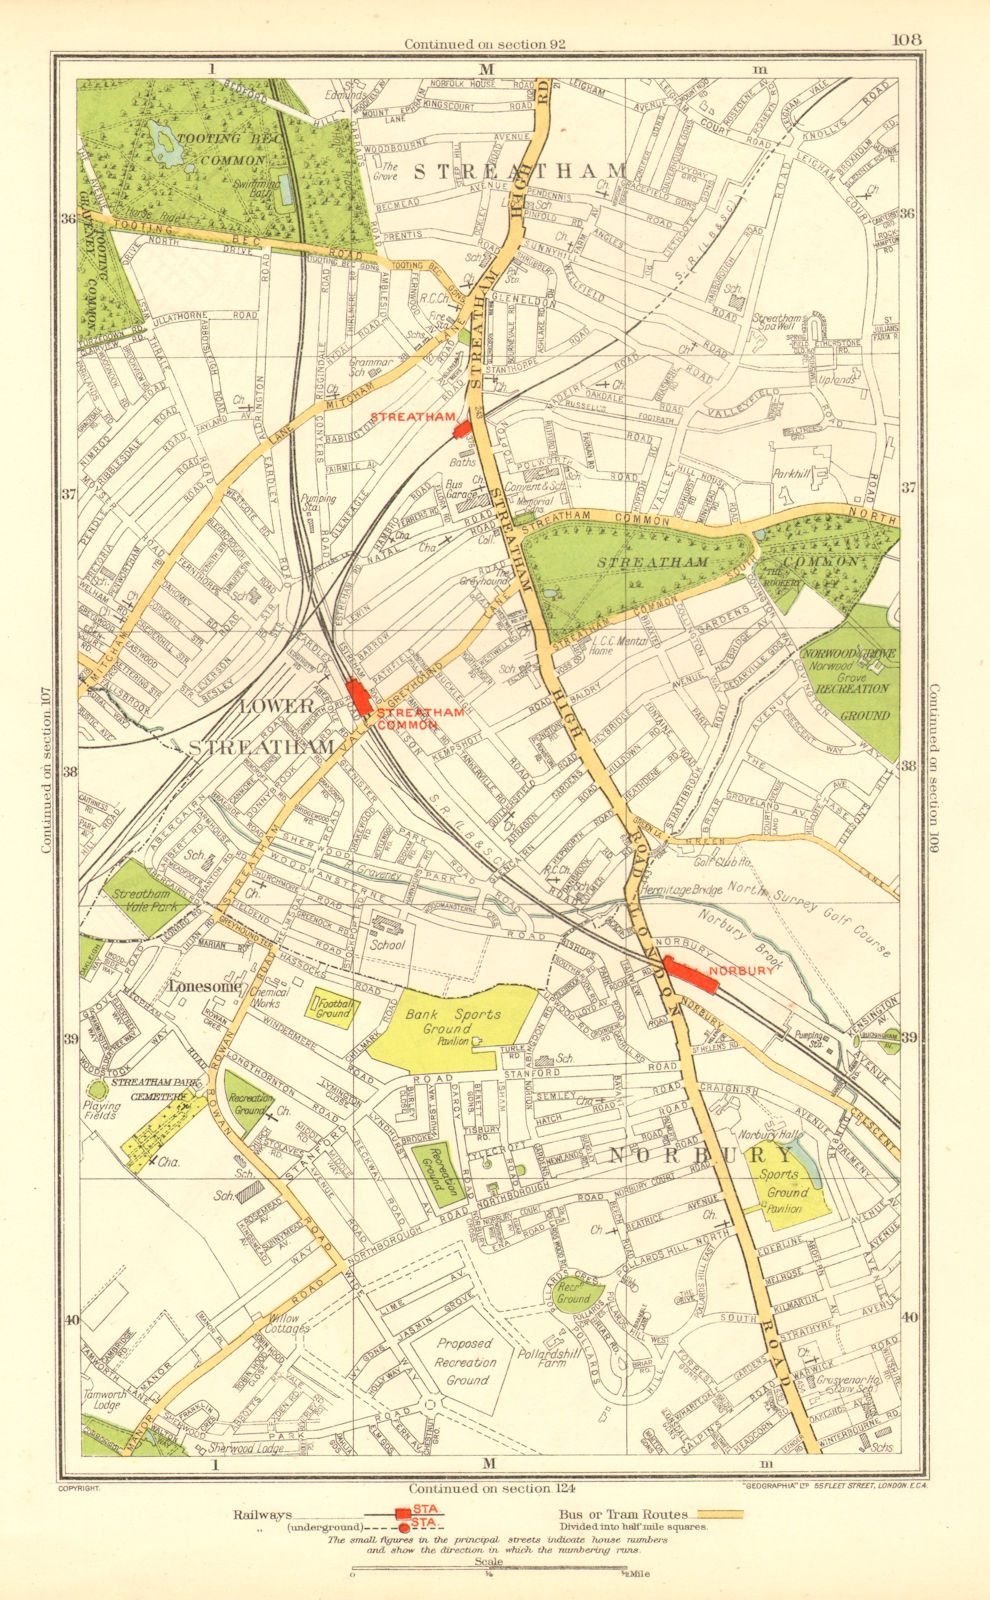 LONDON. Lonesome Lower Streatham Norbury Streatham Common Tooting Bec 1937 map